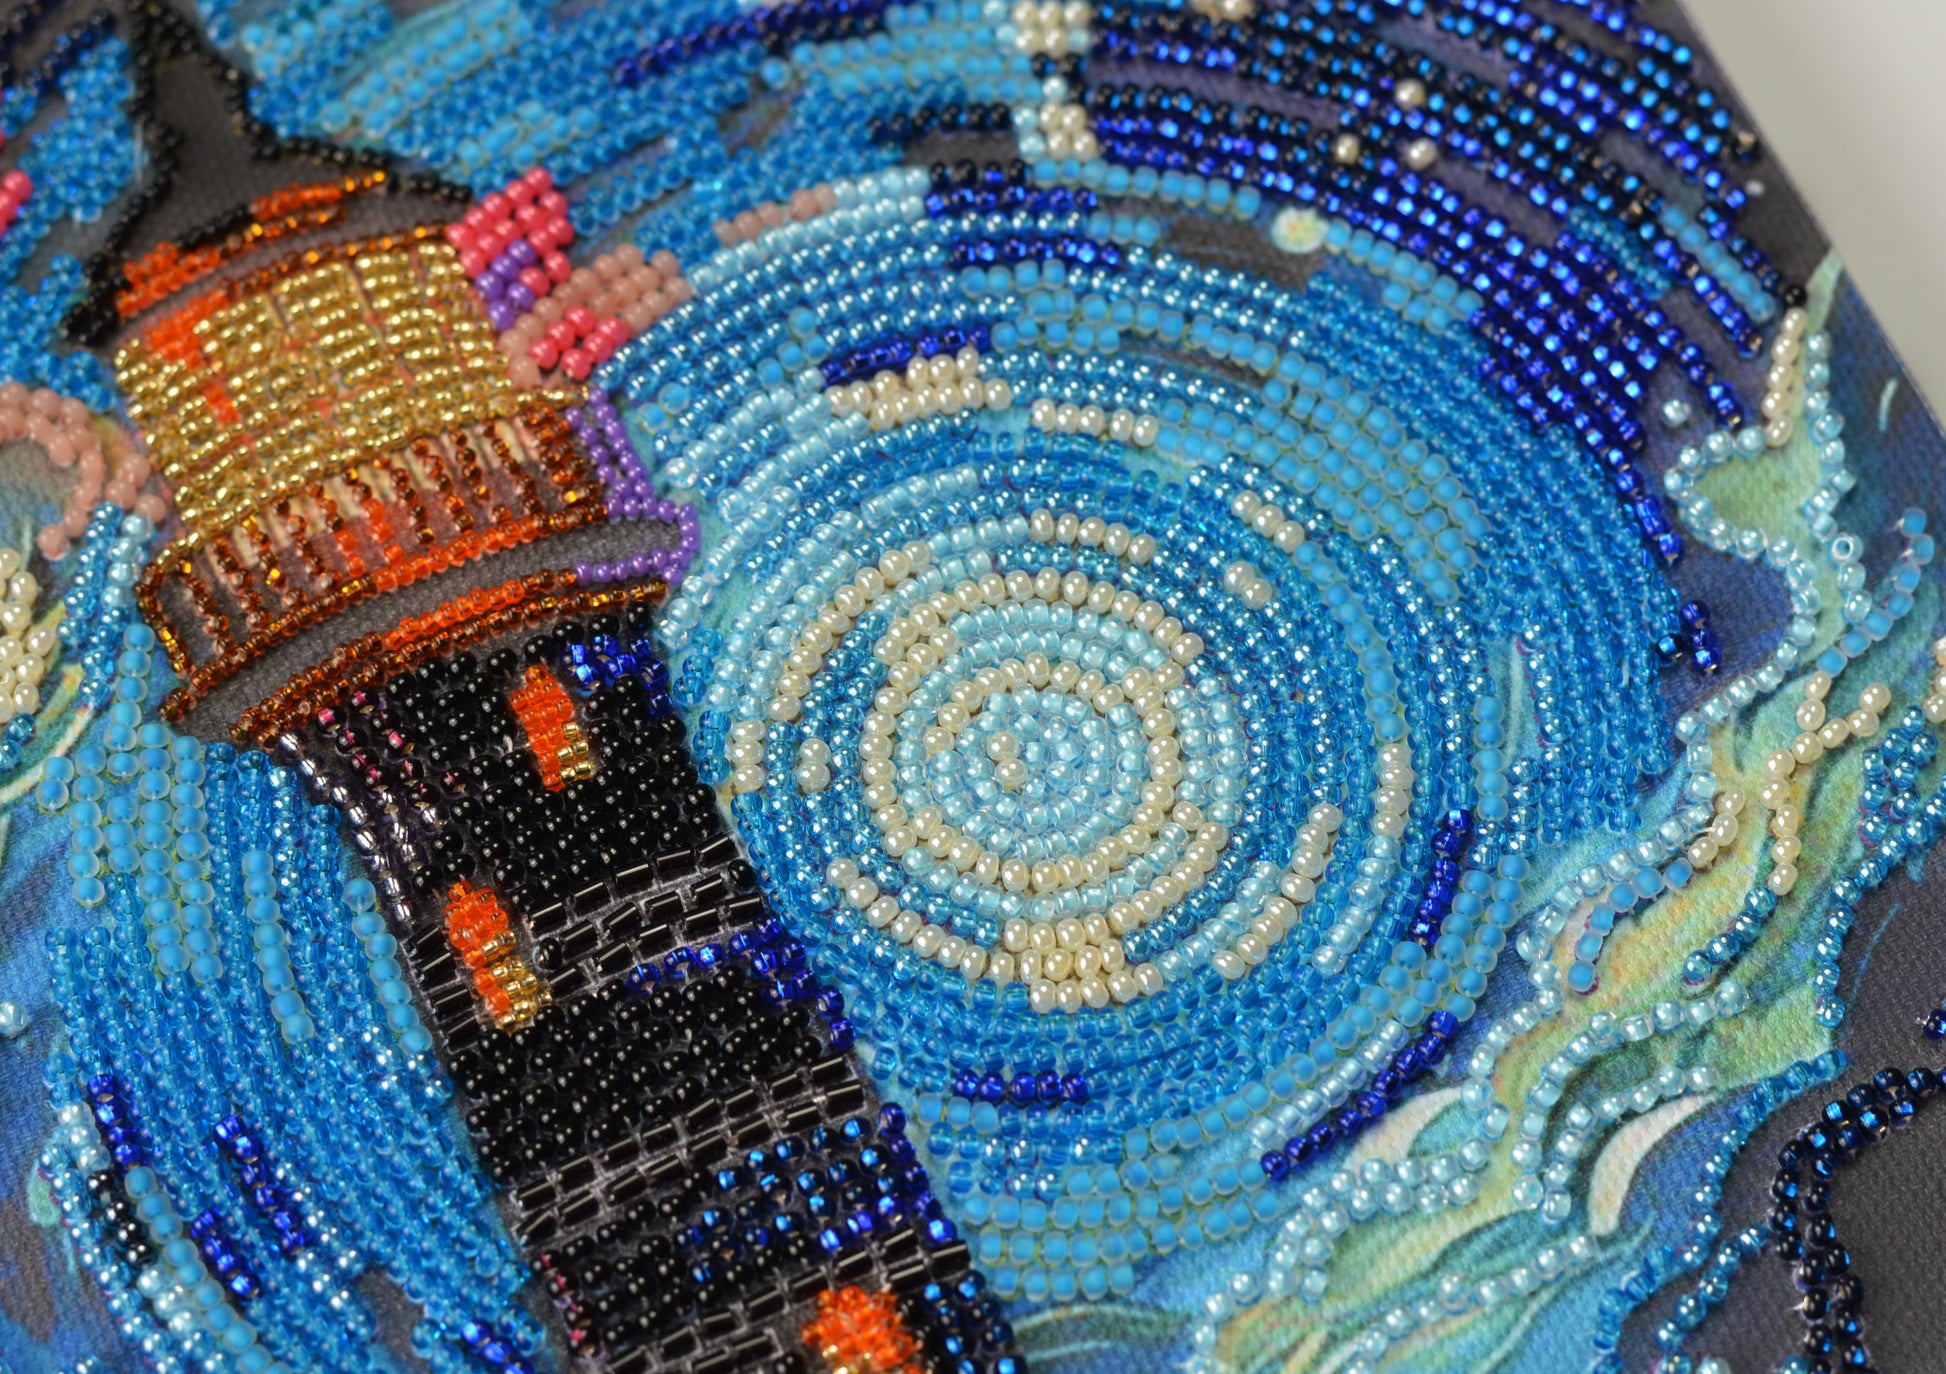 Bead embroidery kit Lighthouse Size: 7.9"×12.6" (20×32 cm)